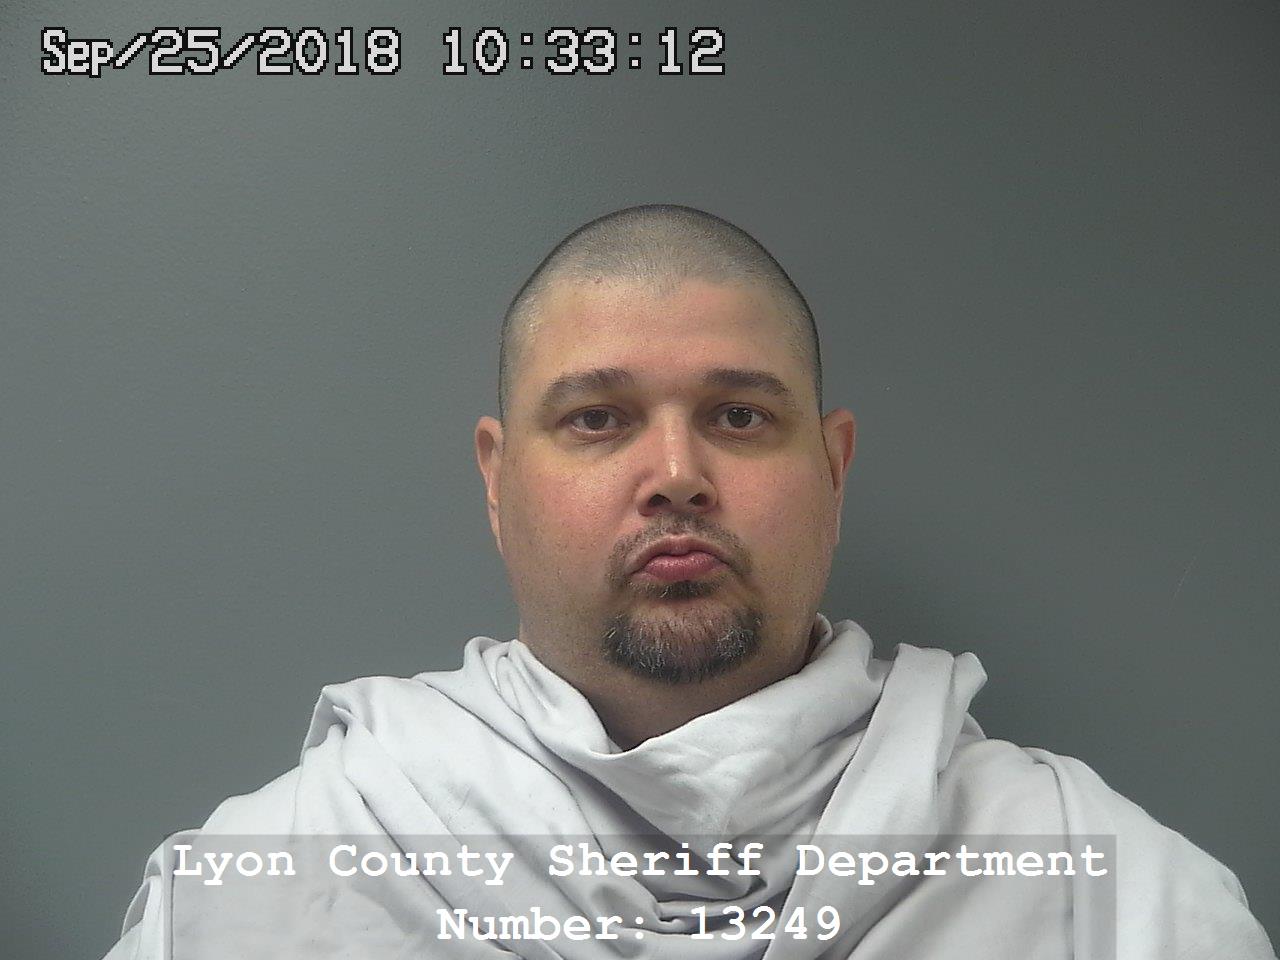 Lyon County inmate's death investigated KAKE